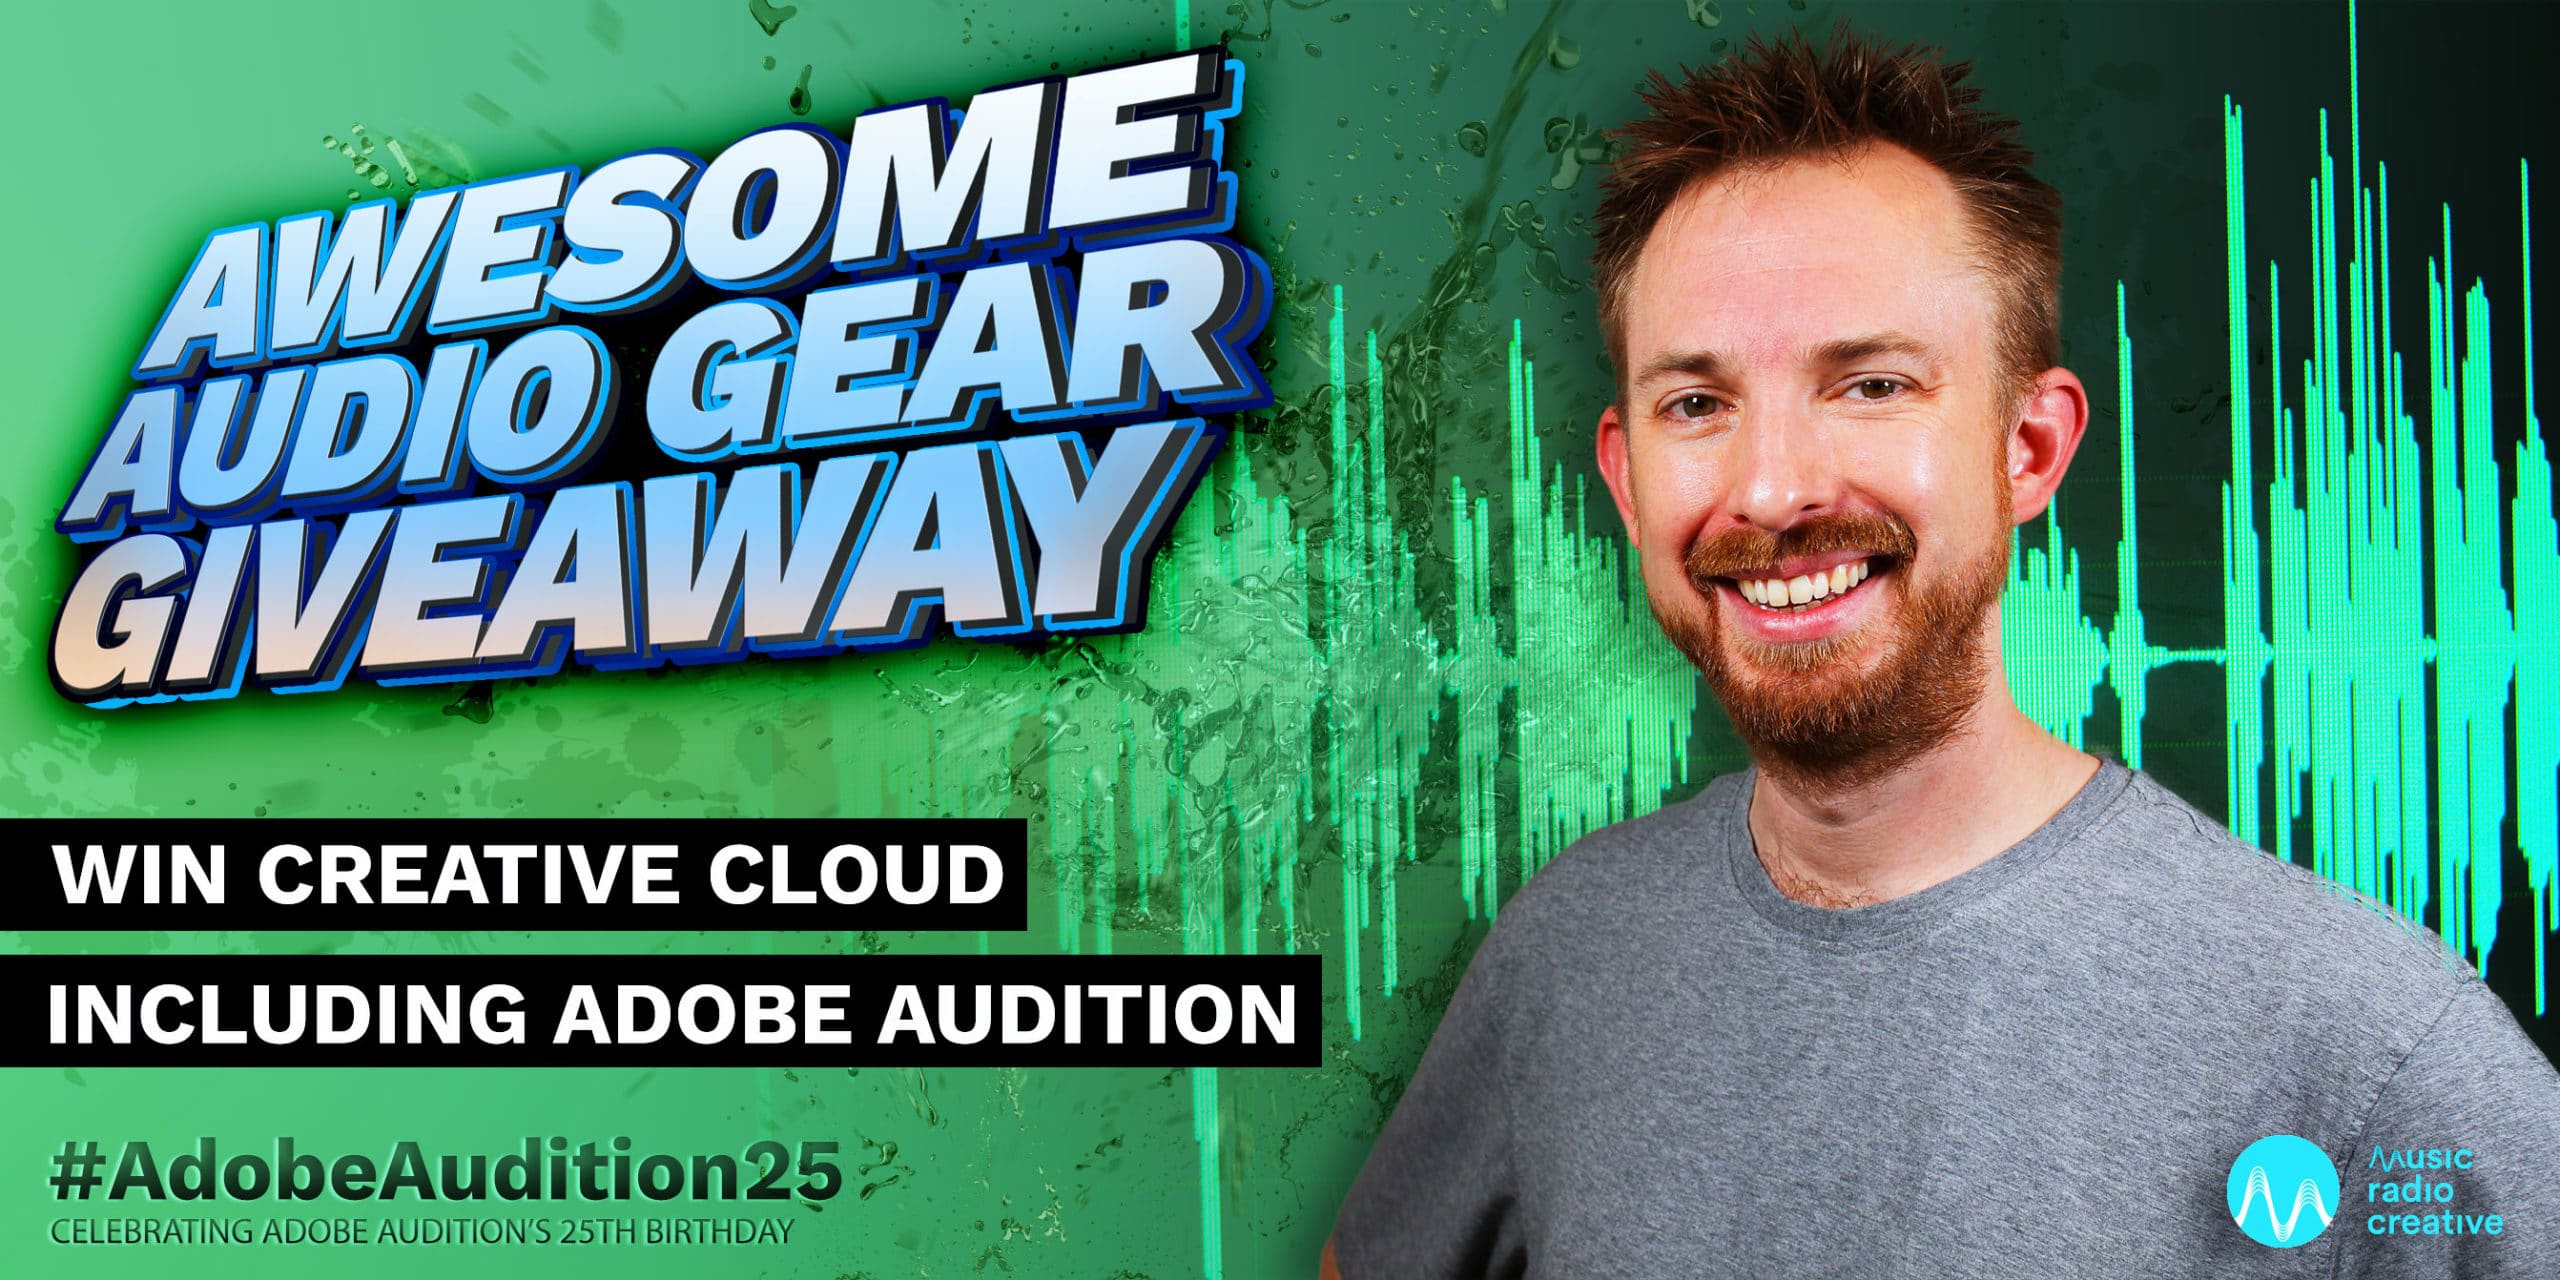 Win Creative Cloud including Adobe Audition Awesome Audio Gear Giveaway  Music Radio Creative